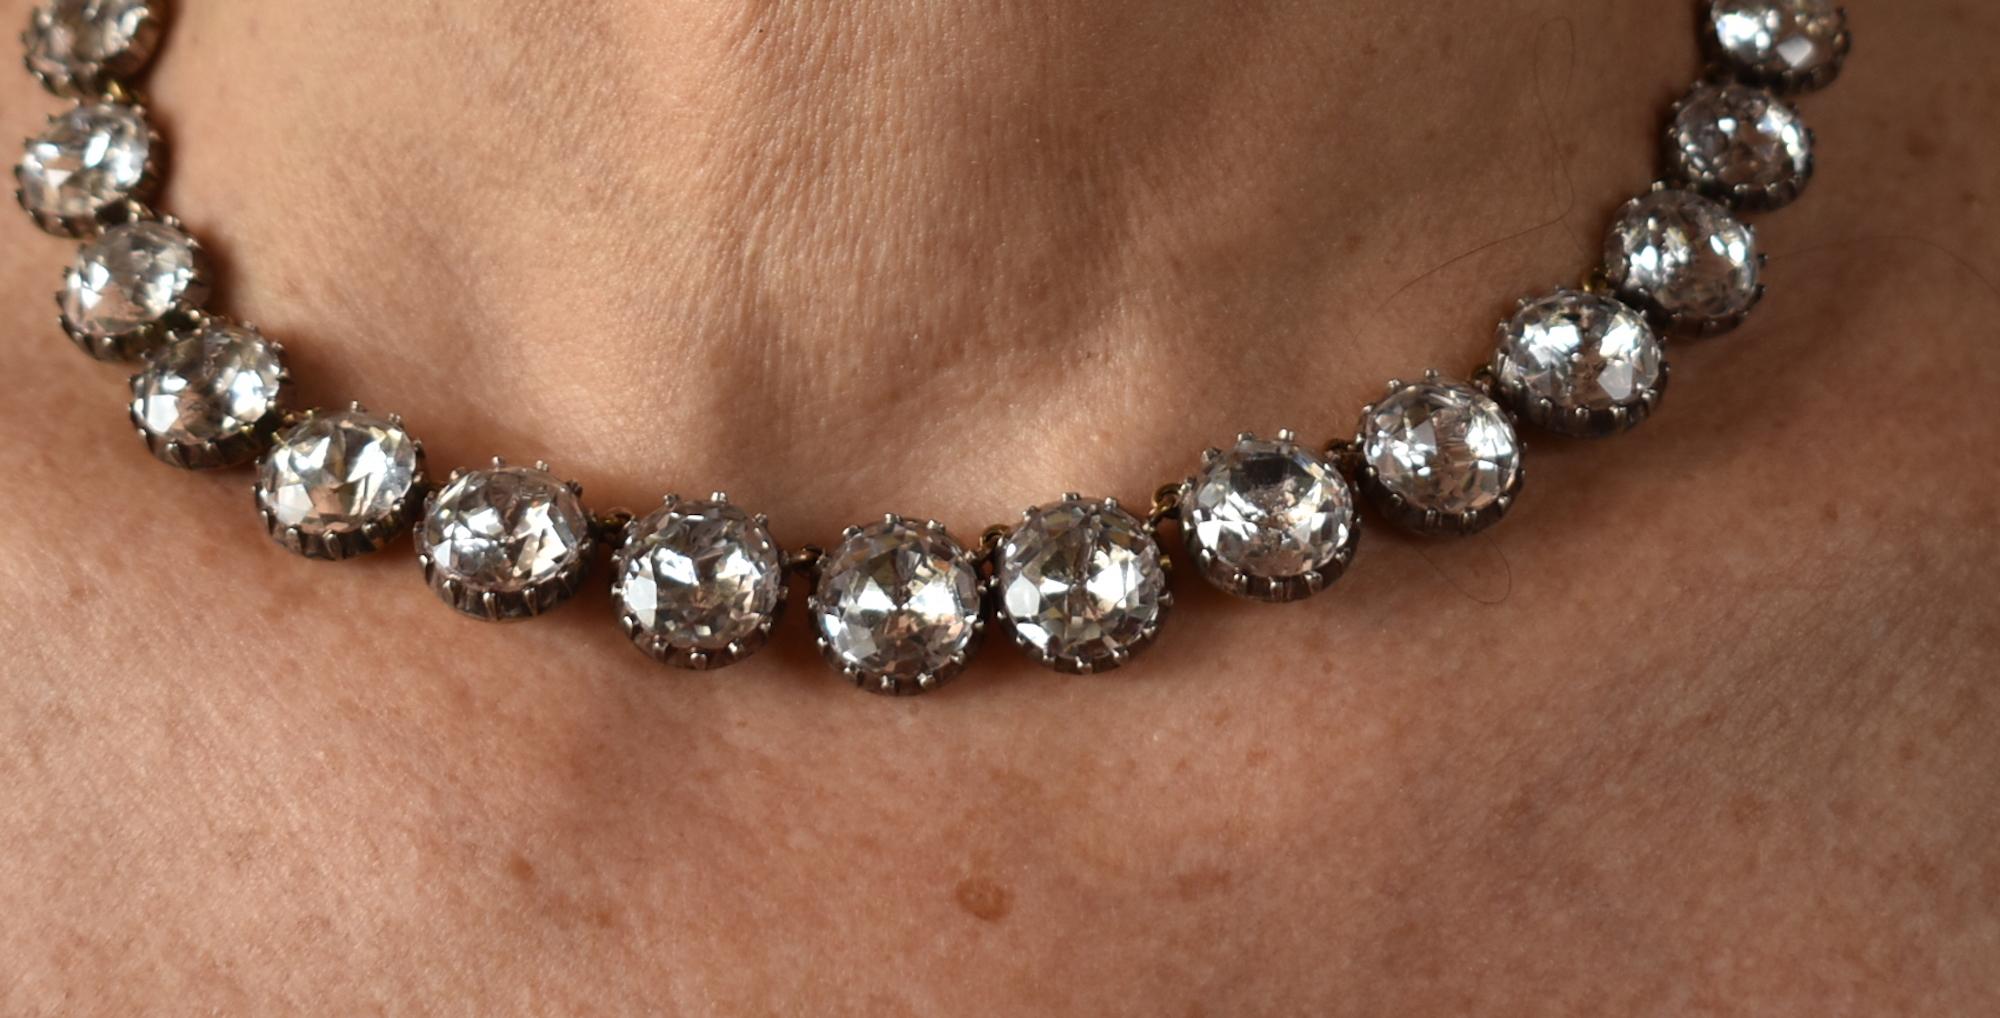  Known as a river of light, the rock crystal riviere was the classic Georgian necklace for night time wear. Legend has it that the Riviera in the South of France was given its name because to those peering out along the sea from the ships, the